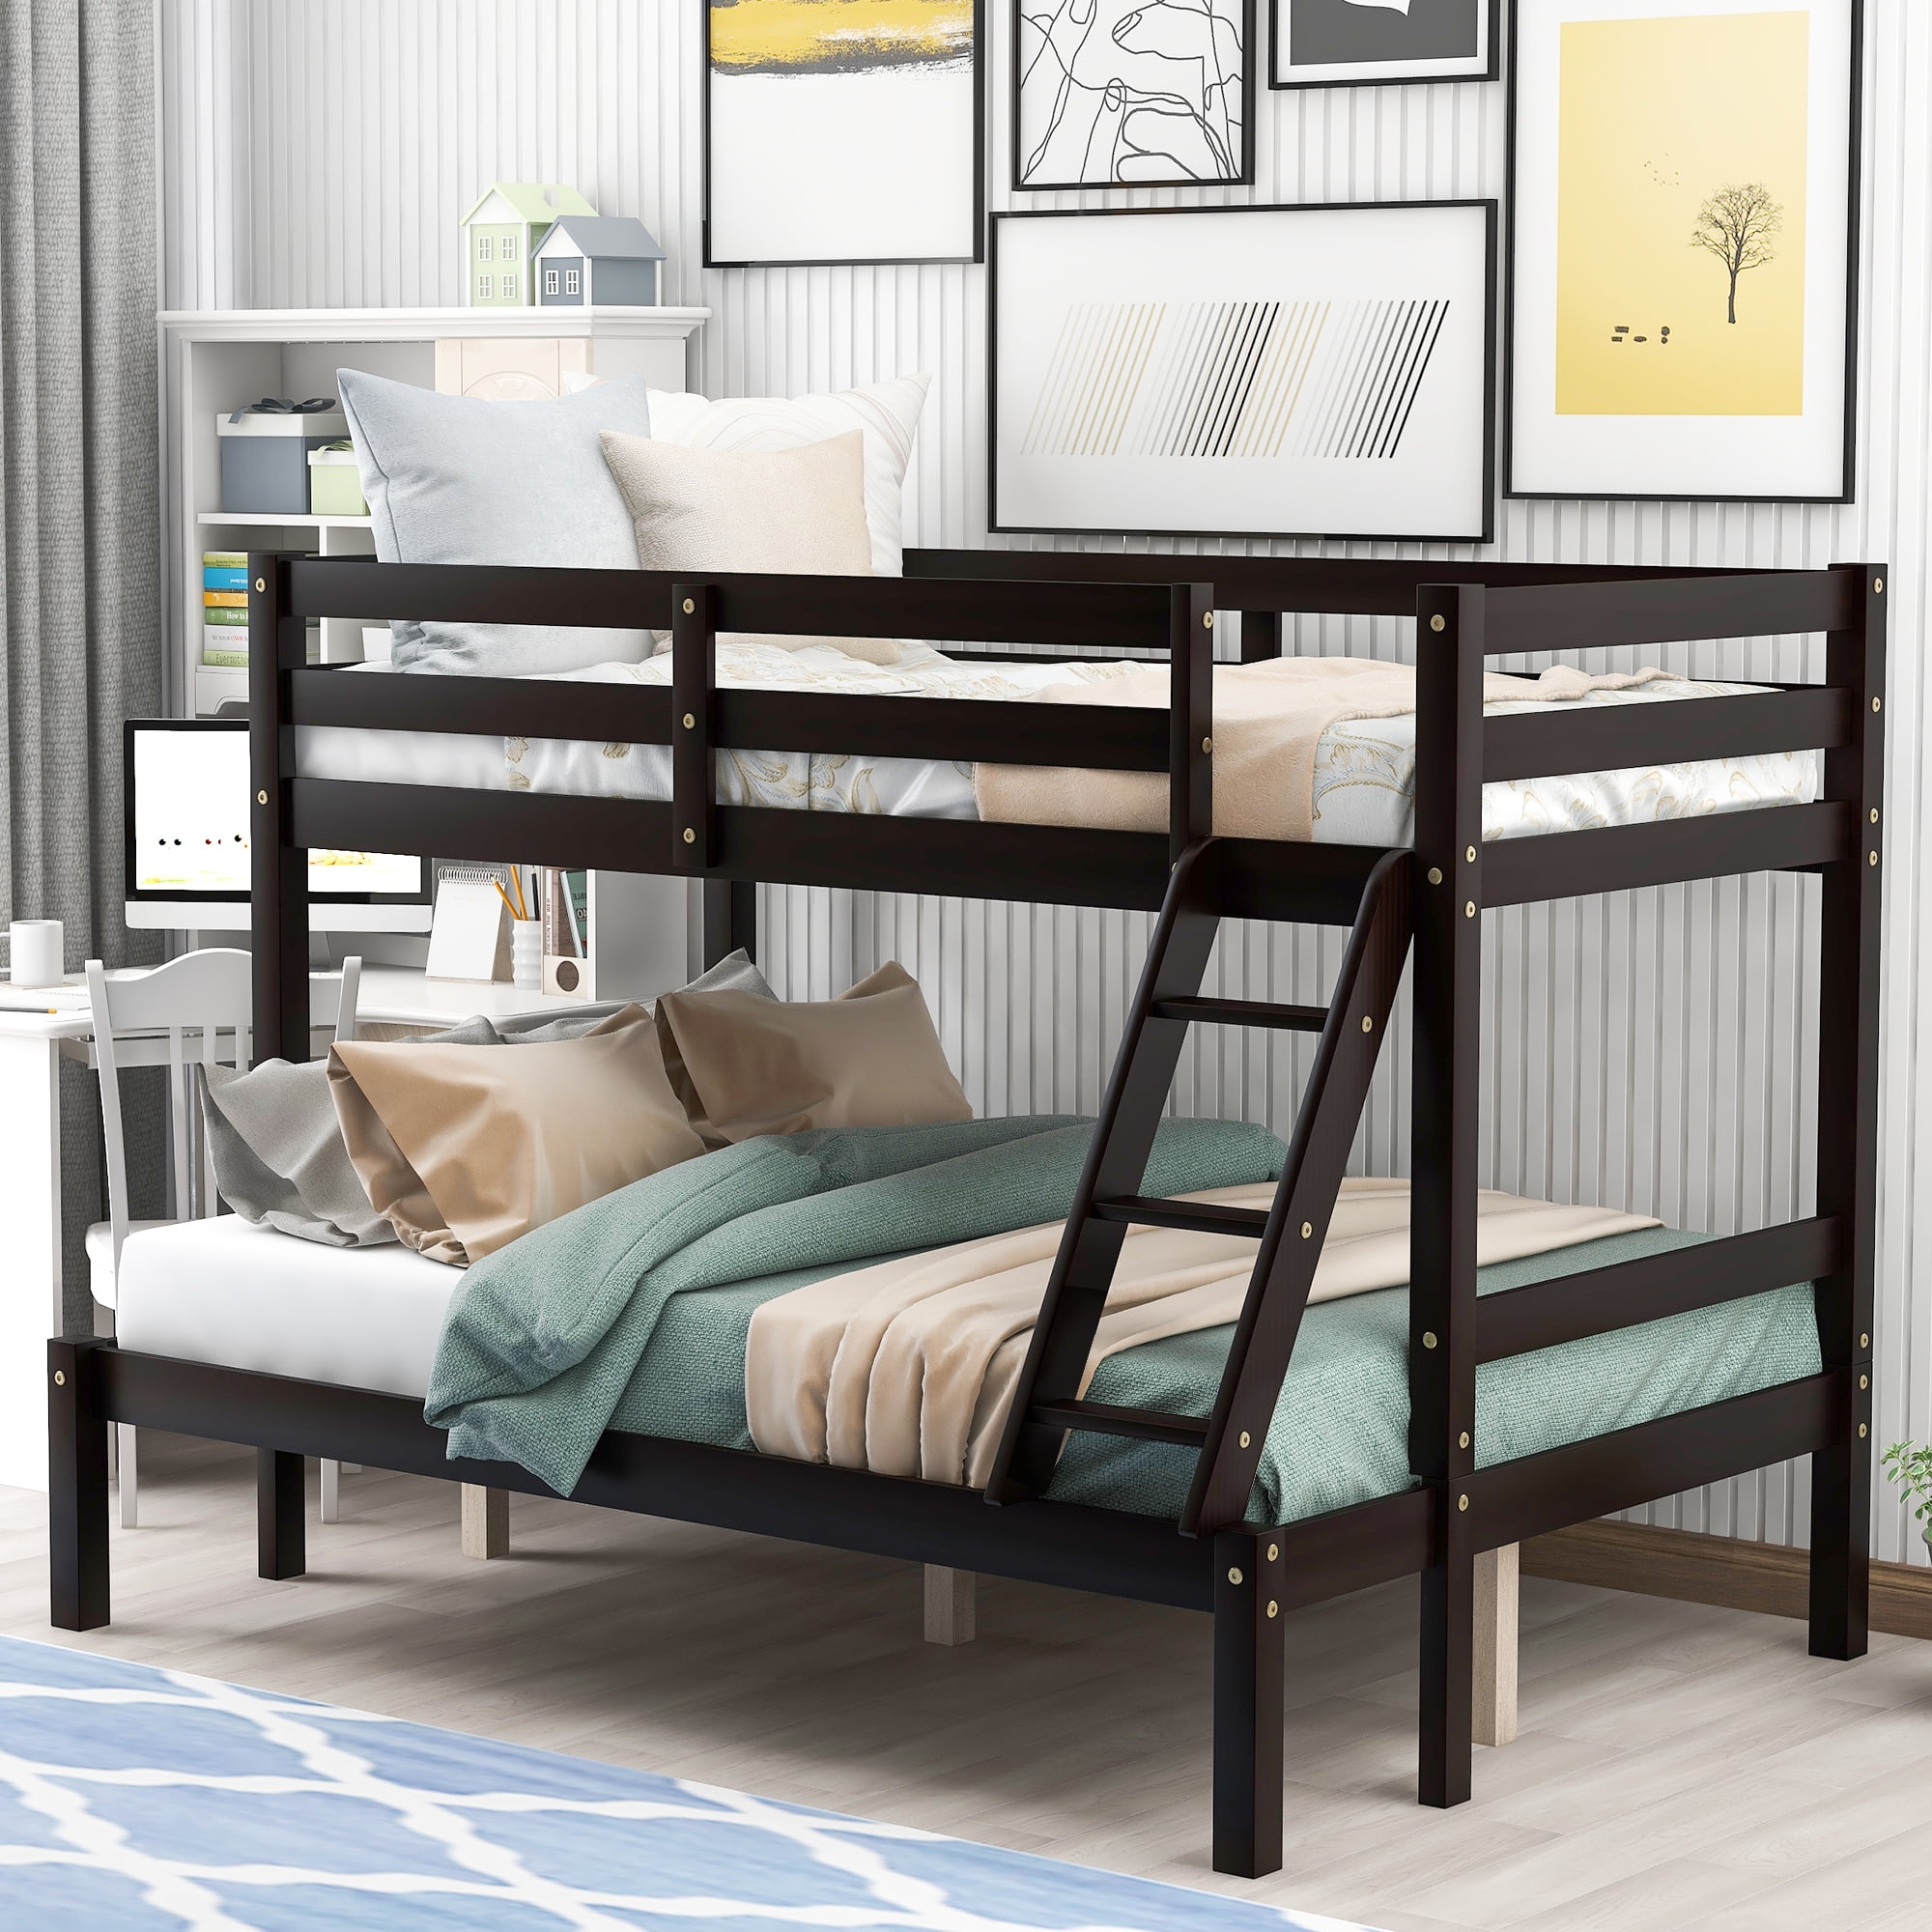 Bunk Bed Solid Wood Bunk Bed For Kids Twin Over Twin Full Wood Bunk Bed Twin Over Full Bunk Bed Solid Pine Bunk Bed For Kids Twin Over Full W Ladder And Guard Rail